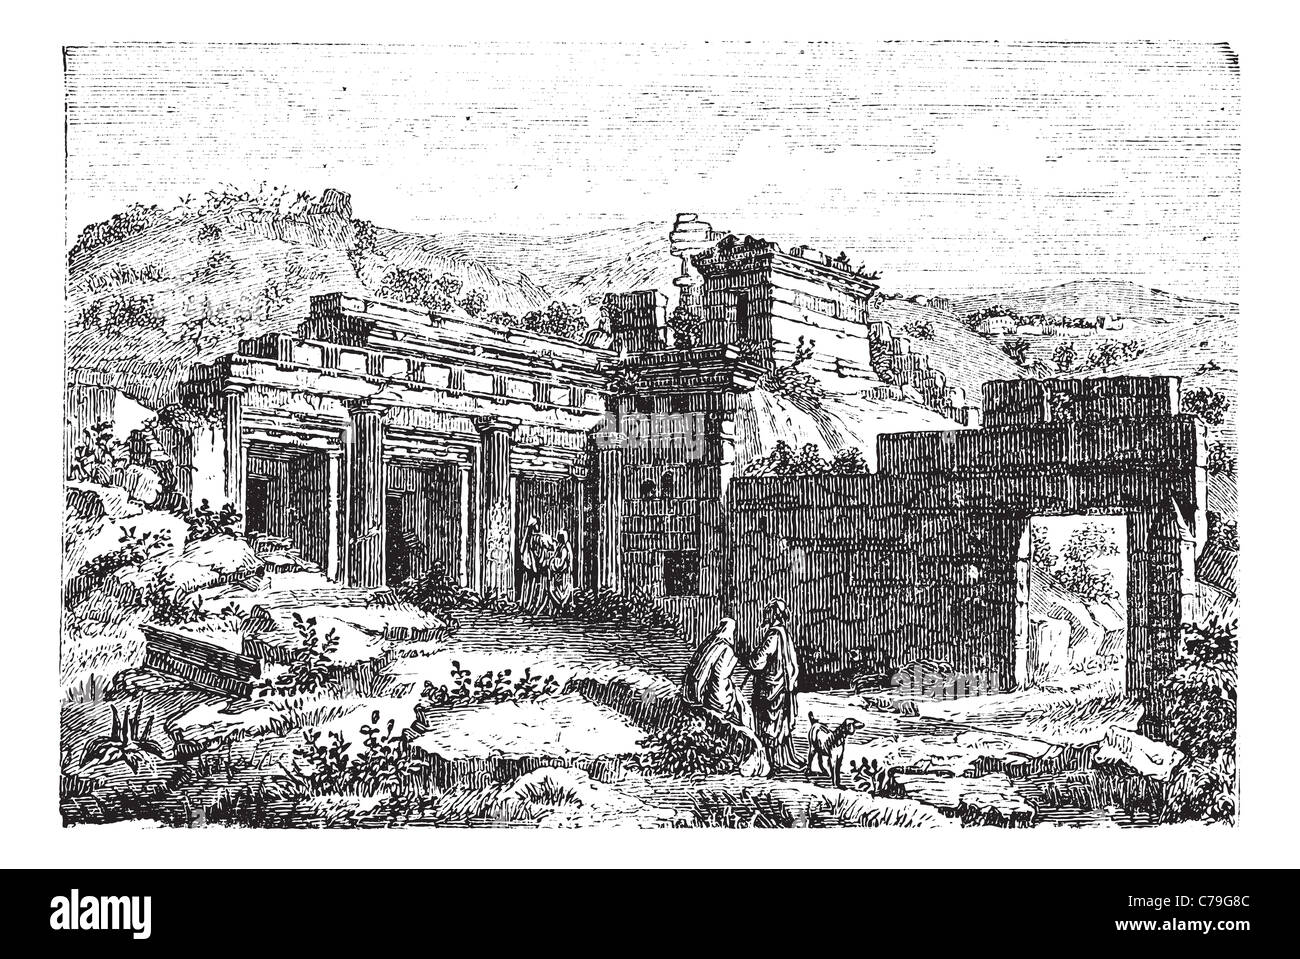 Ruins of Cyrene, in Shahhat, Libya, during the 1890s, vintage engraving. Old engraved illustration of the Ruins of Cyrene. Stock Photo